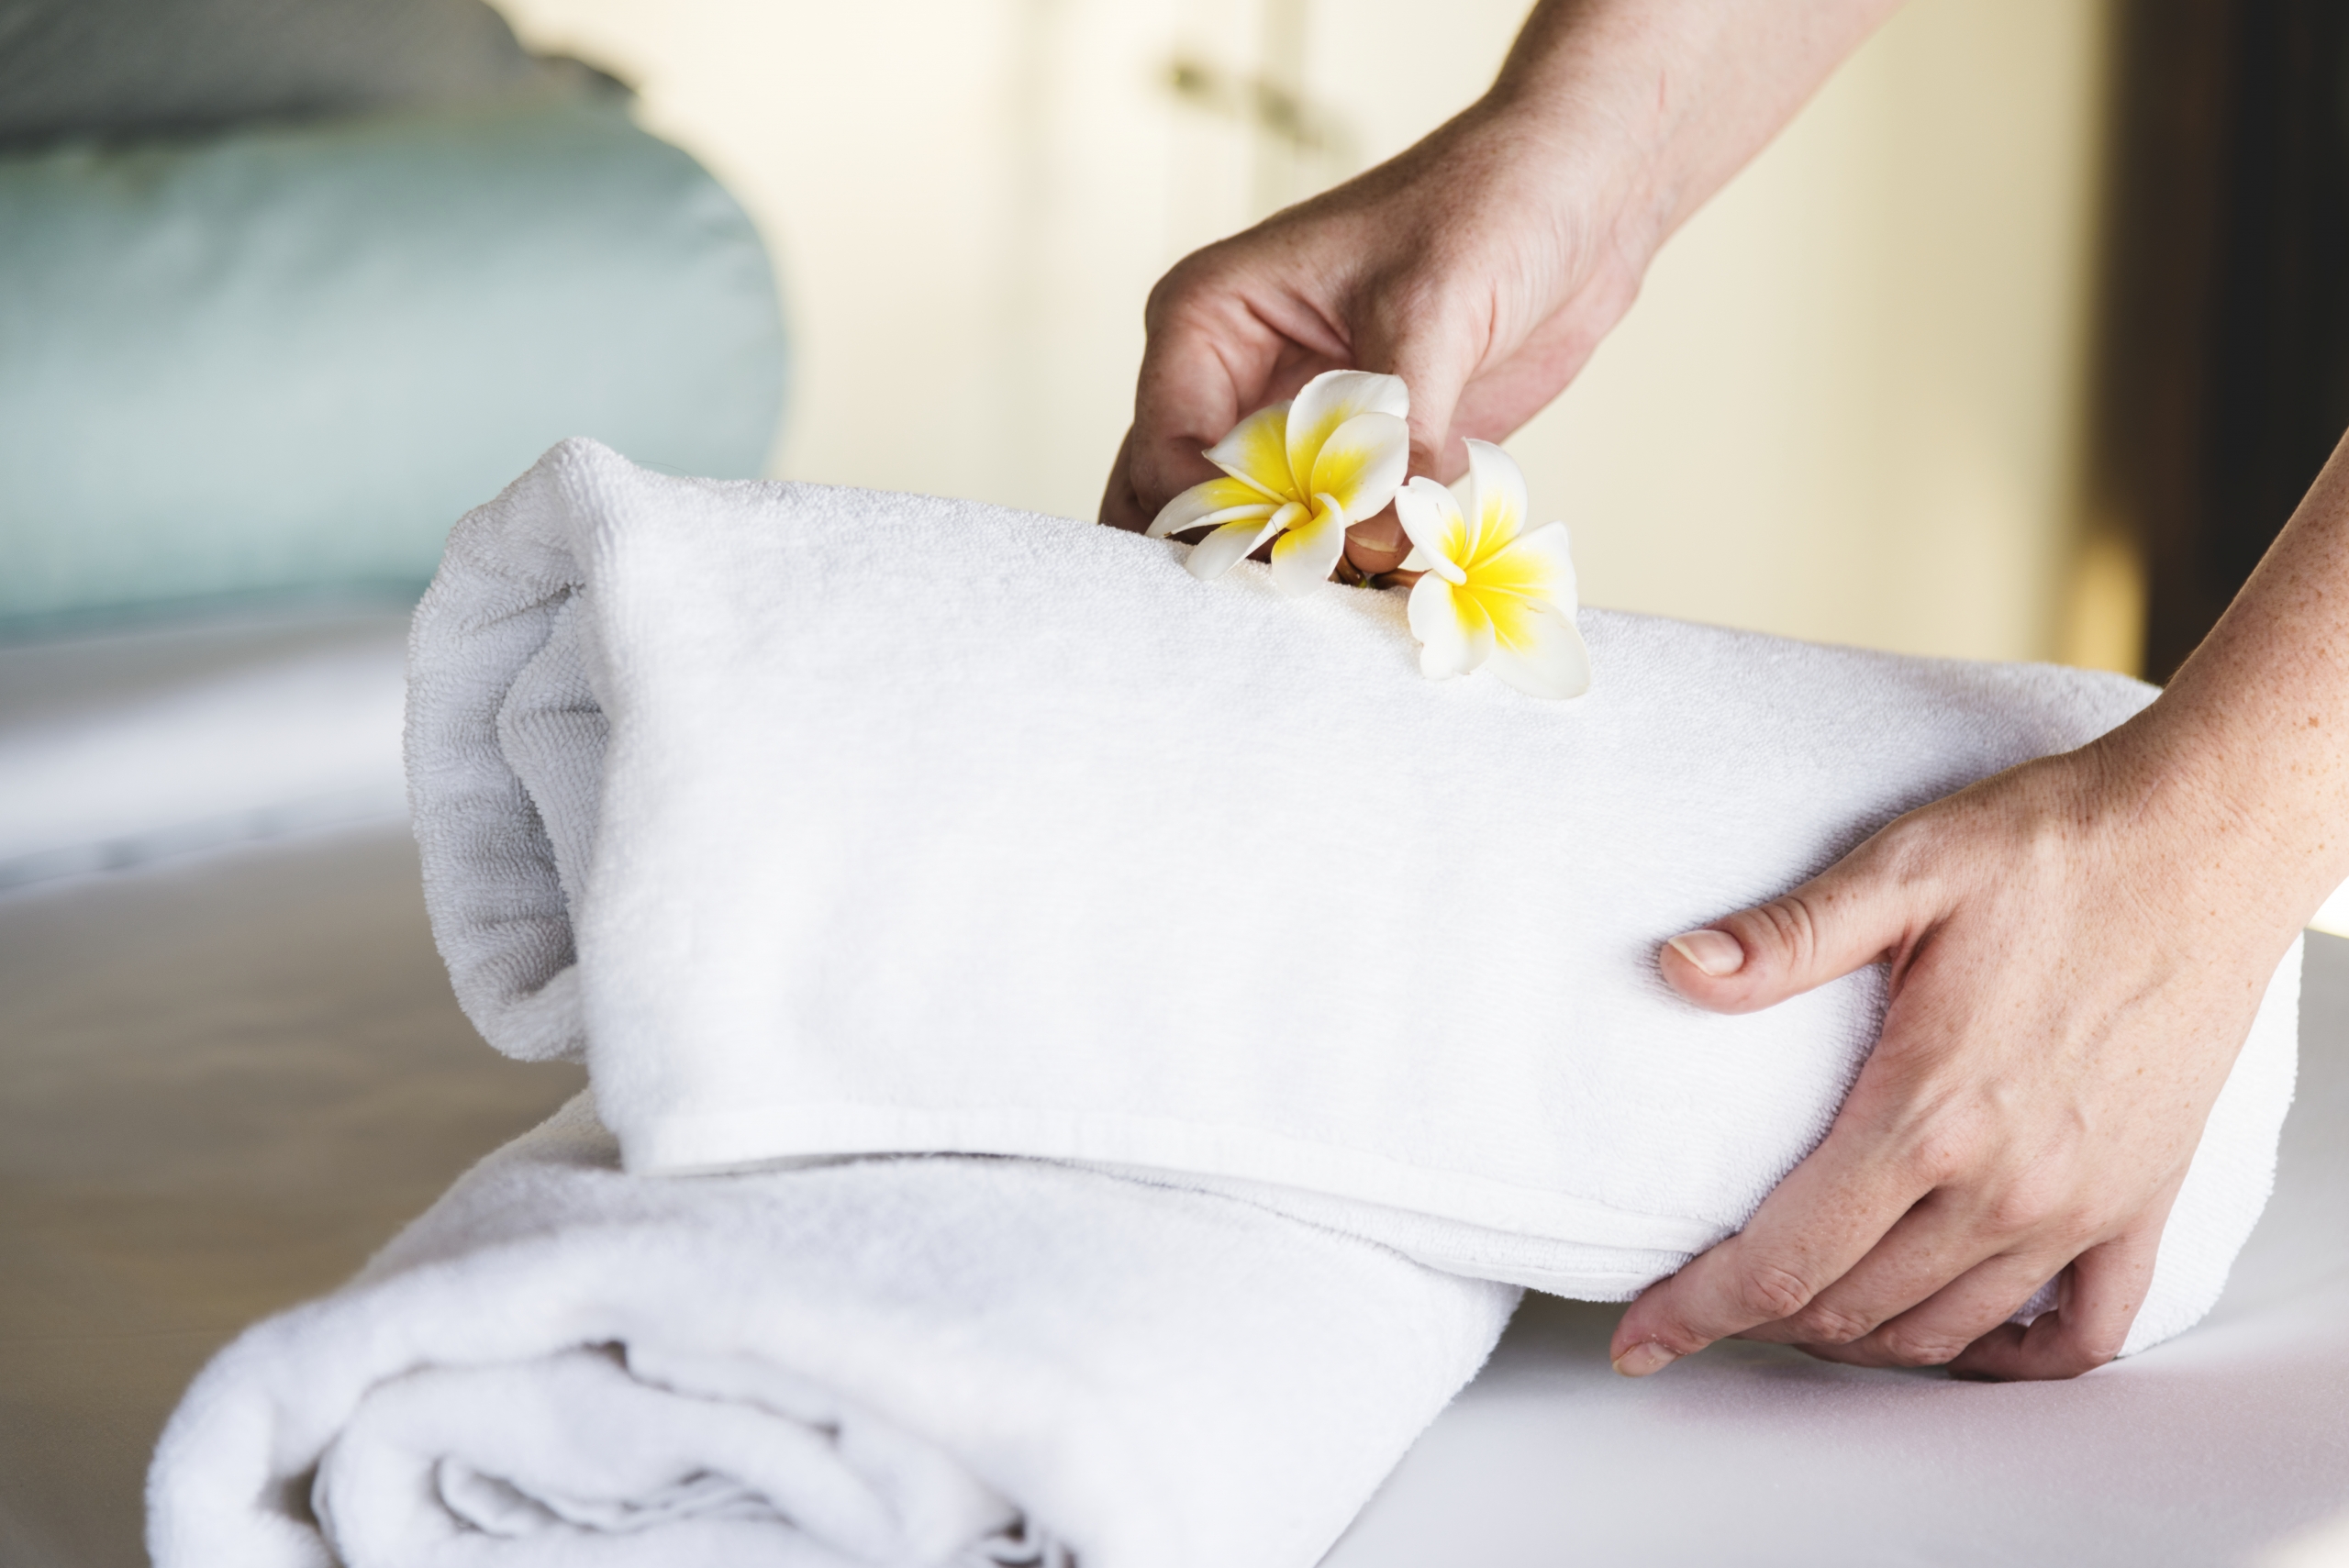 hotel linens affect guests experience